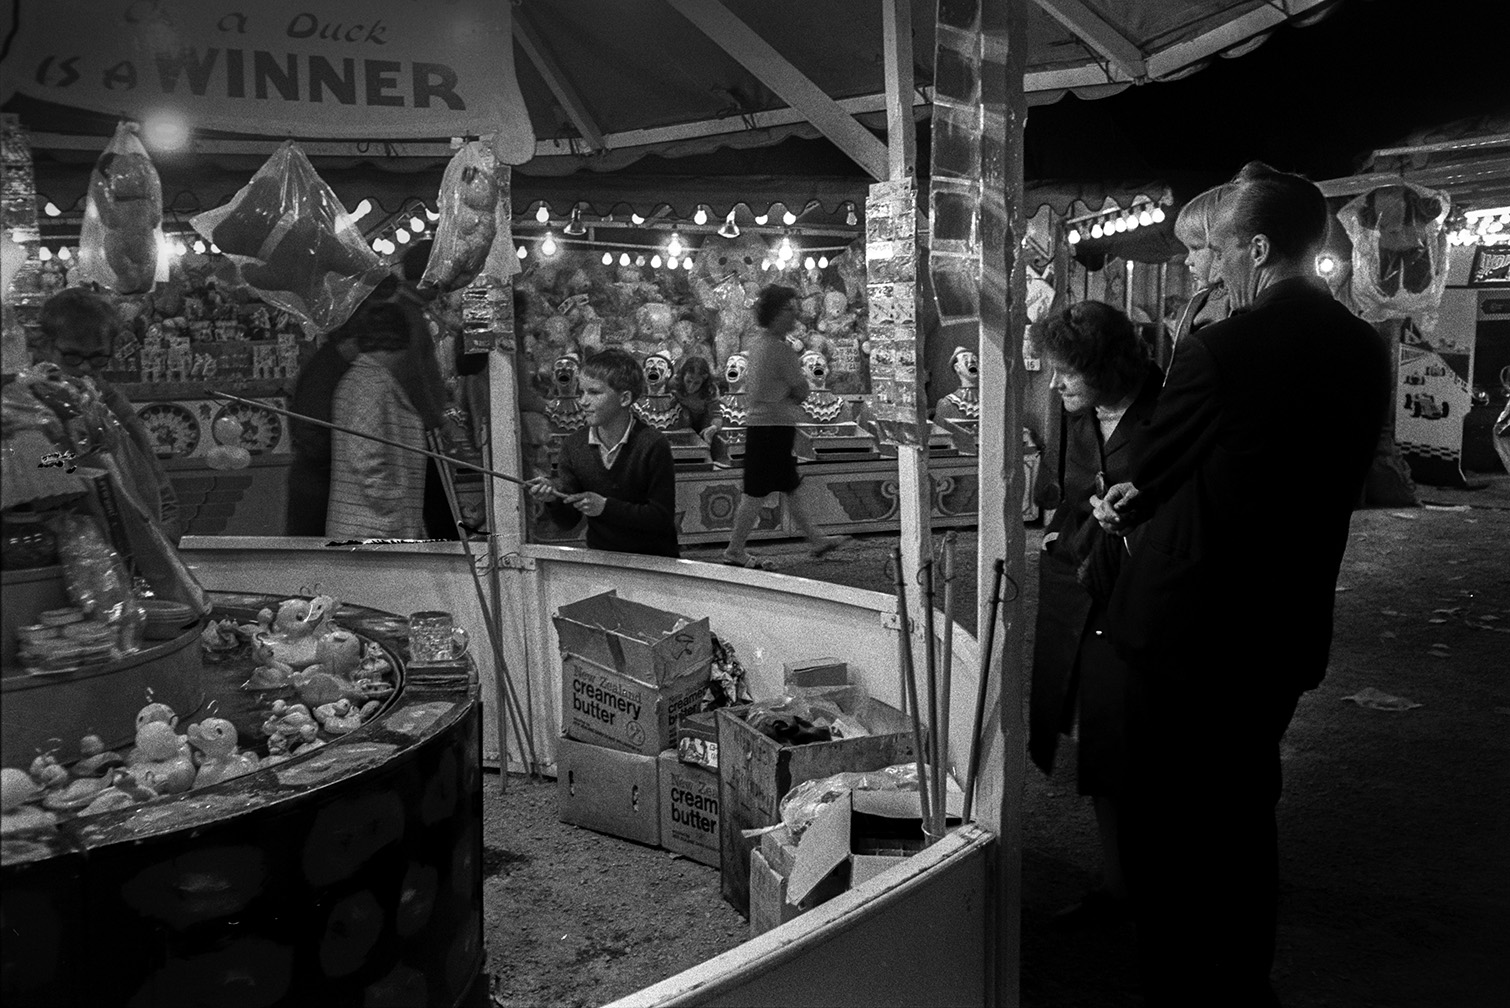 A boy playing the 'hook a duck' game at Barnstaple Fair. His family are watching. Various prizes, including soft toys, are hung up on the stall. Another fairground game can be seen in the background.